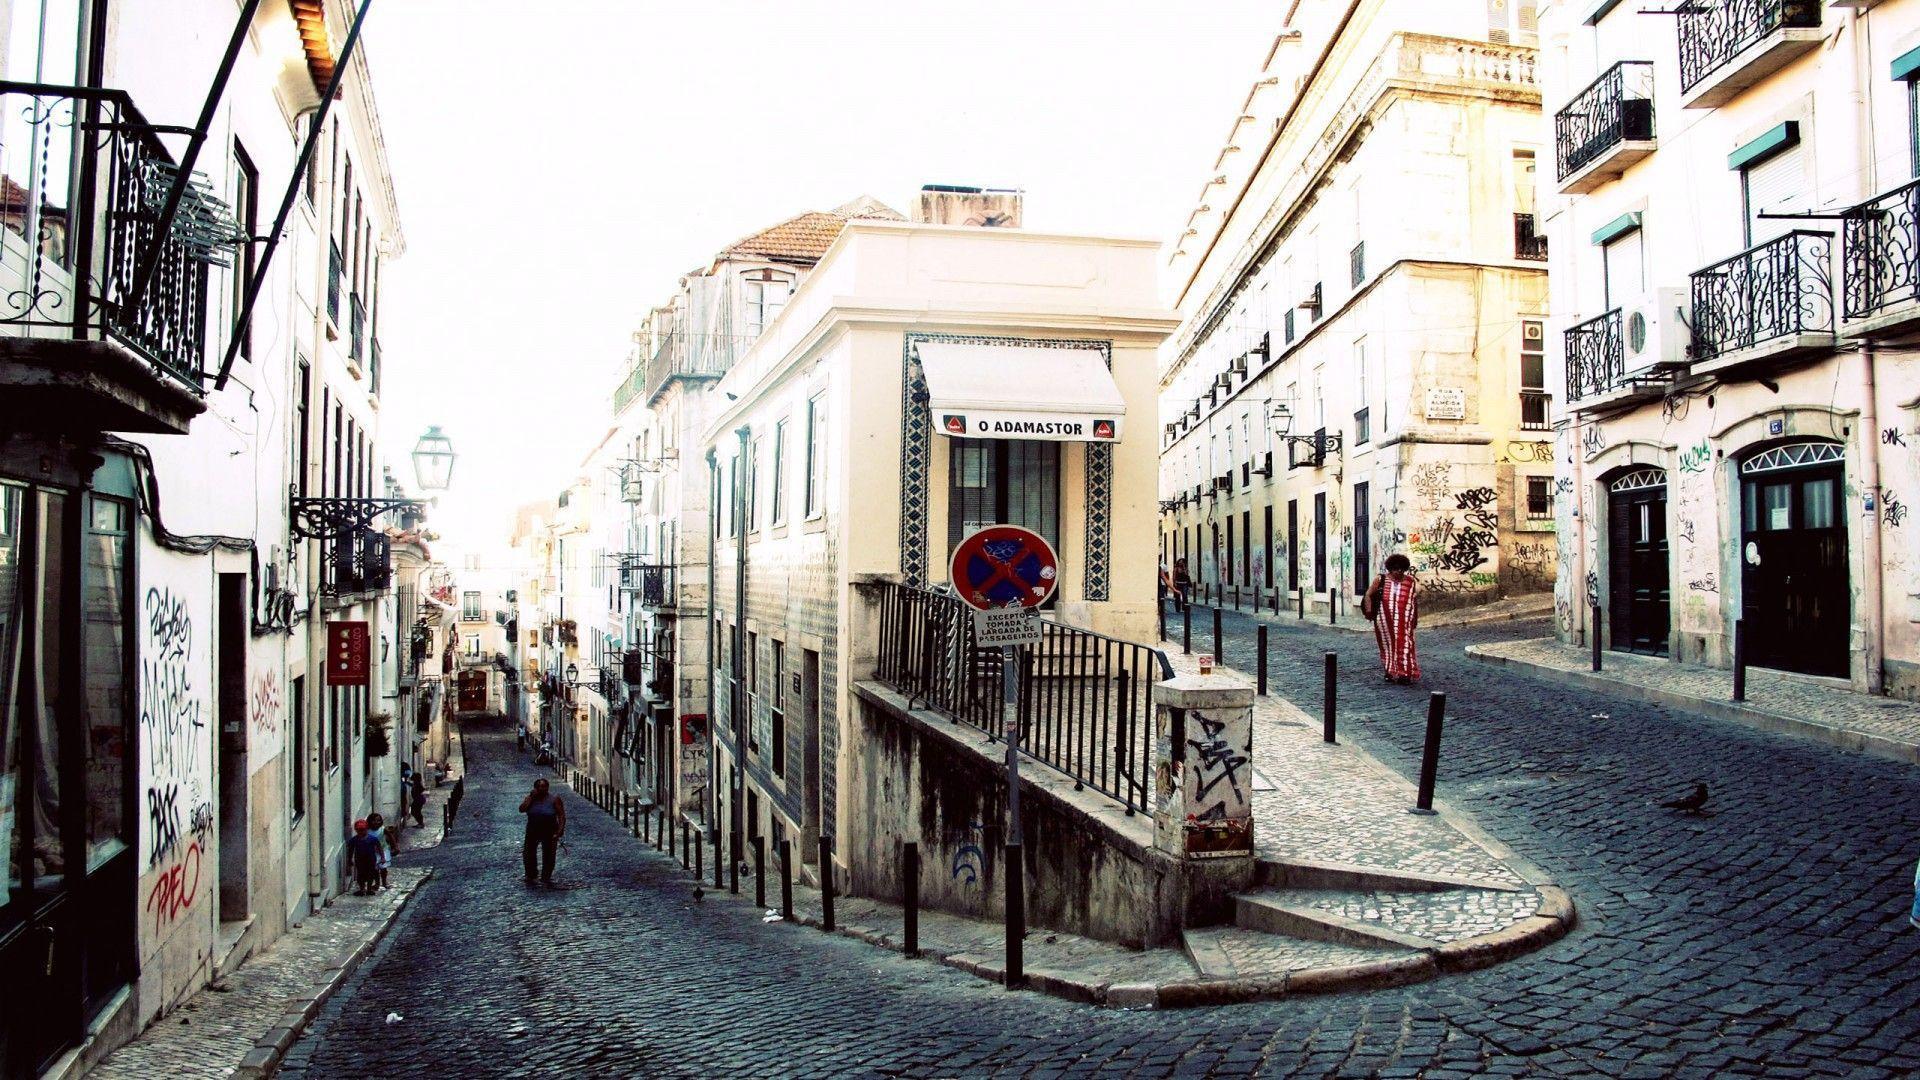 Winding street in Lisbon wallpaper and image